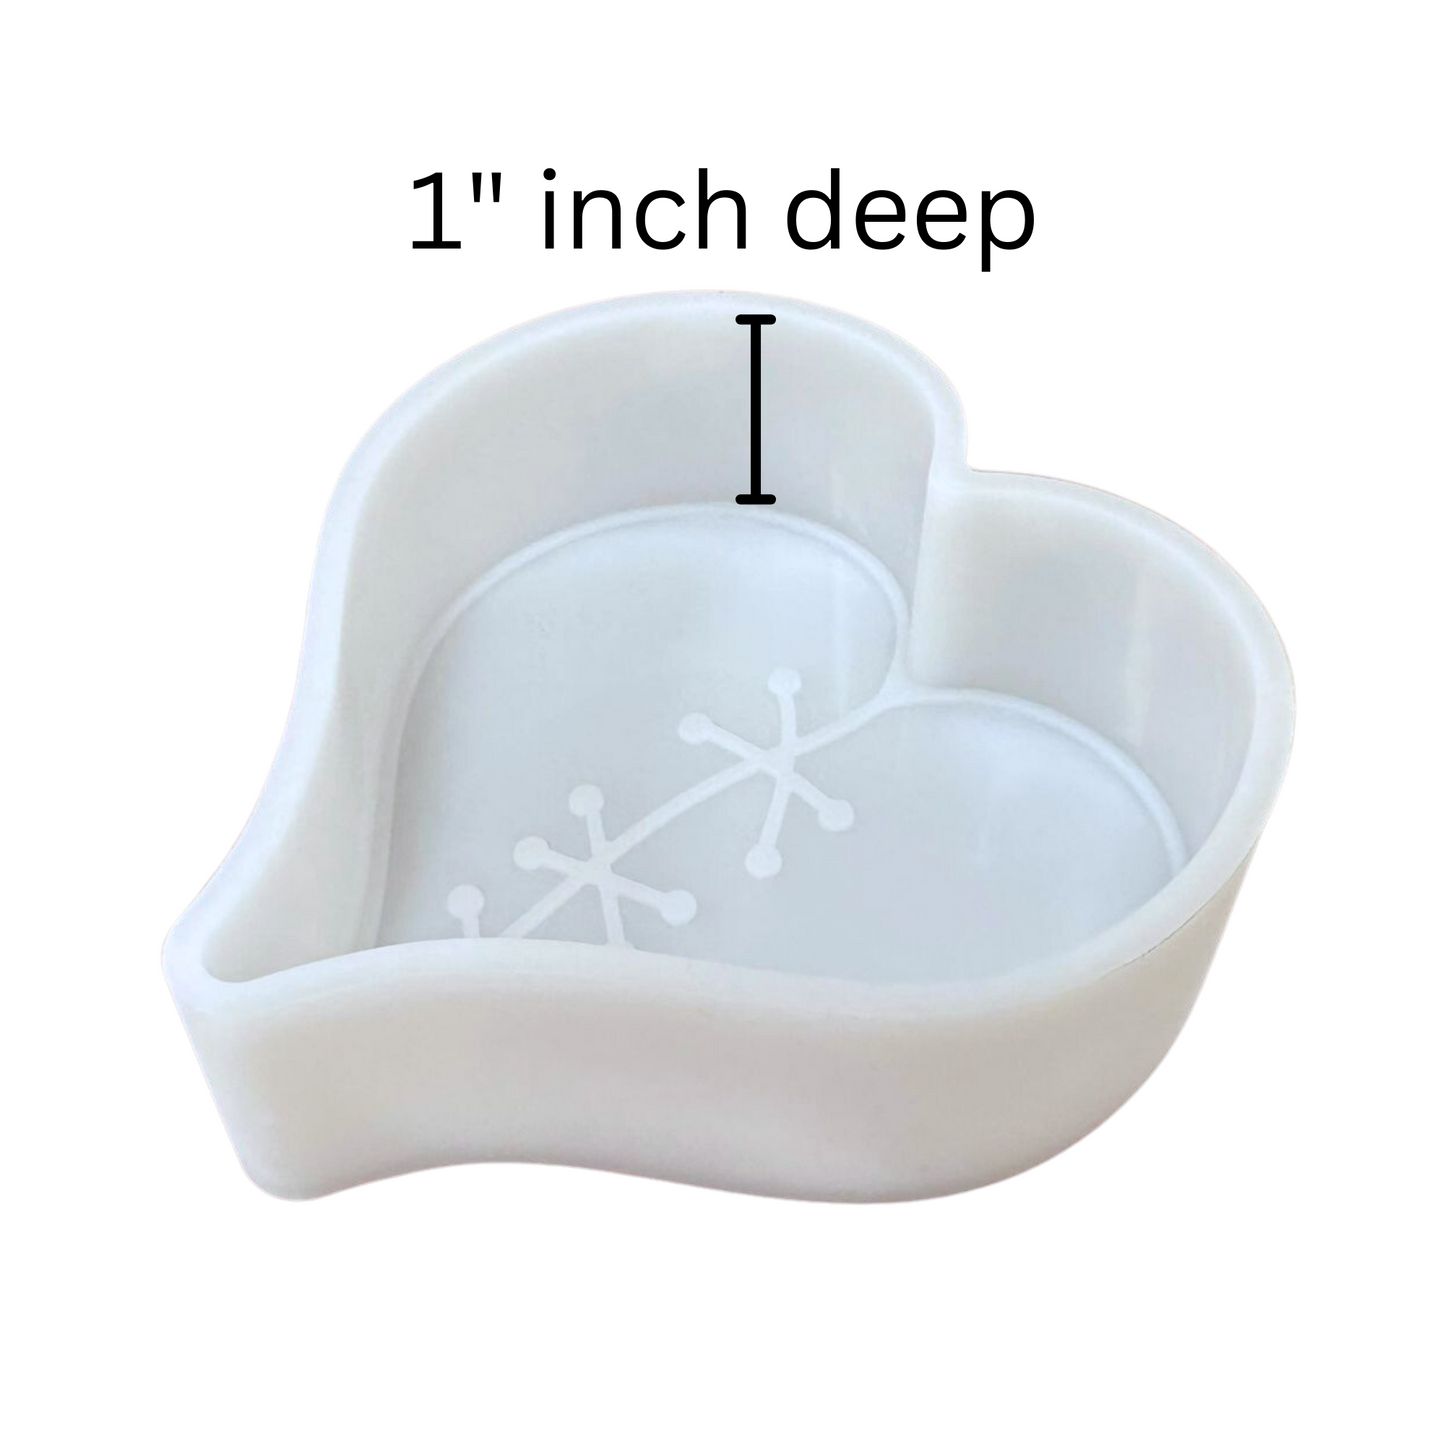 Heart with Stitches Valentines Day Silicone Mold – Mad Dog Crafting